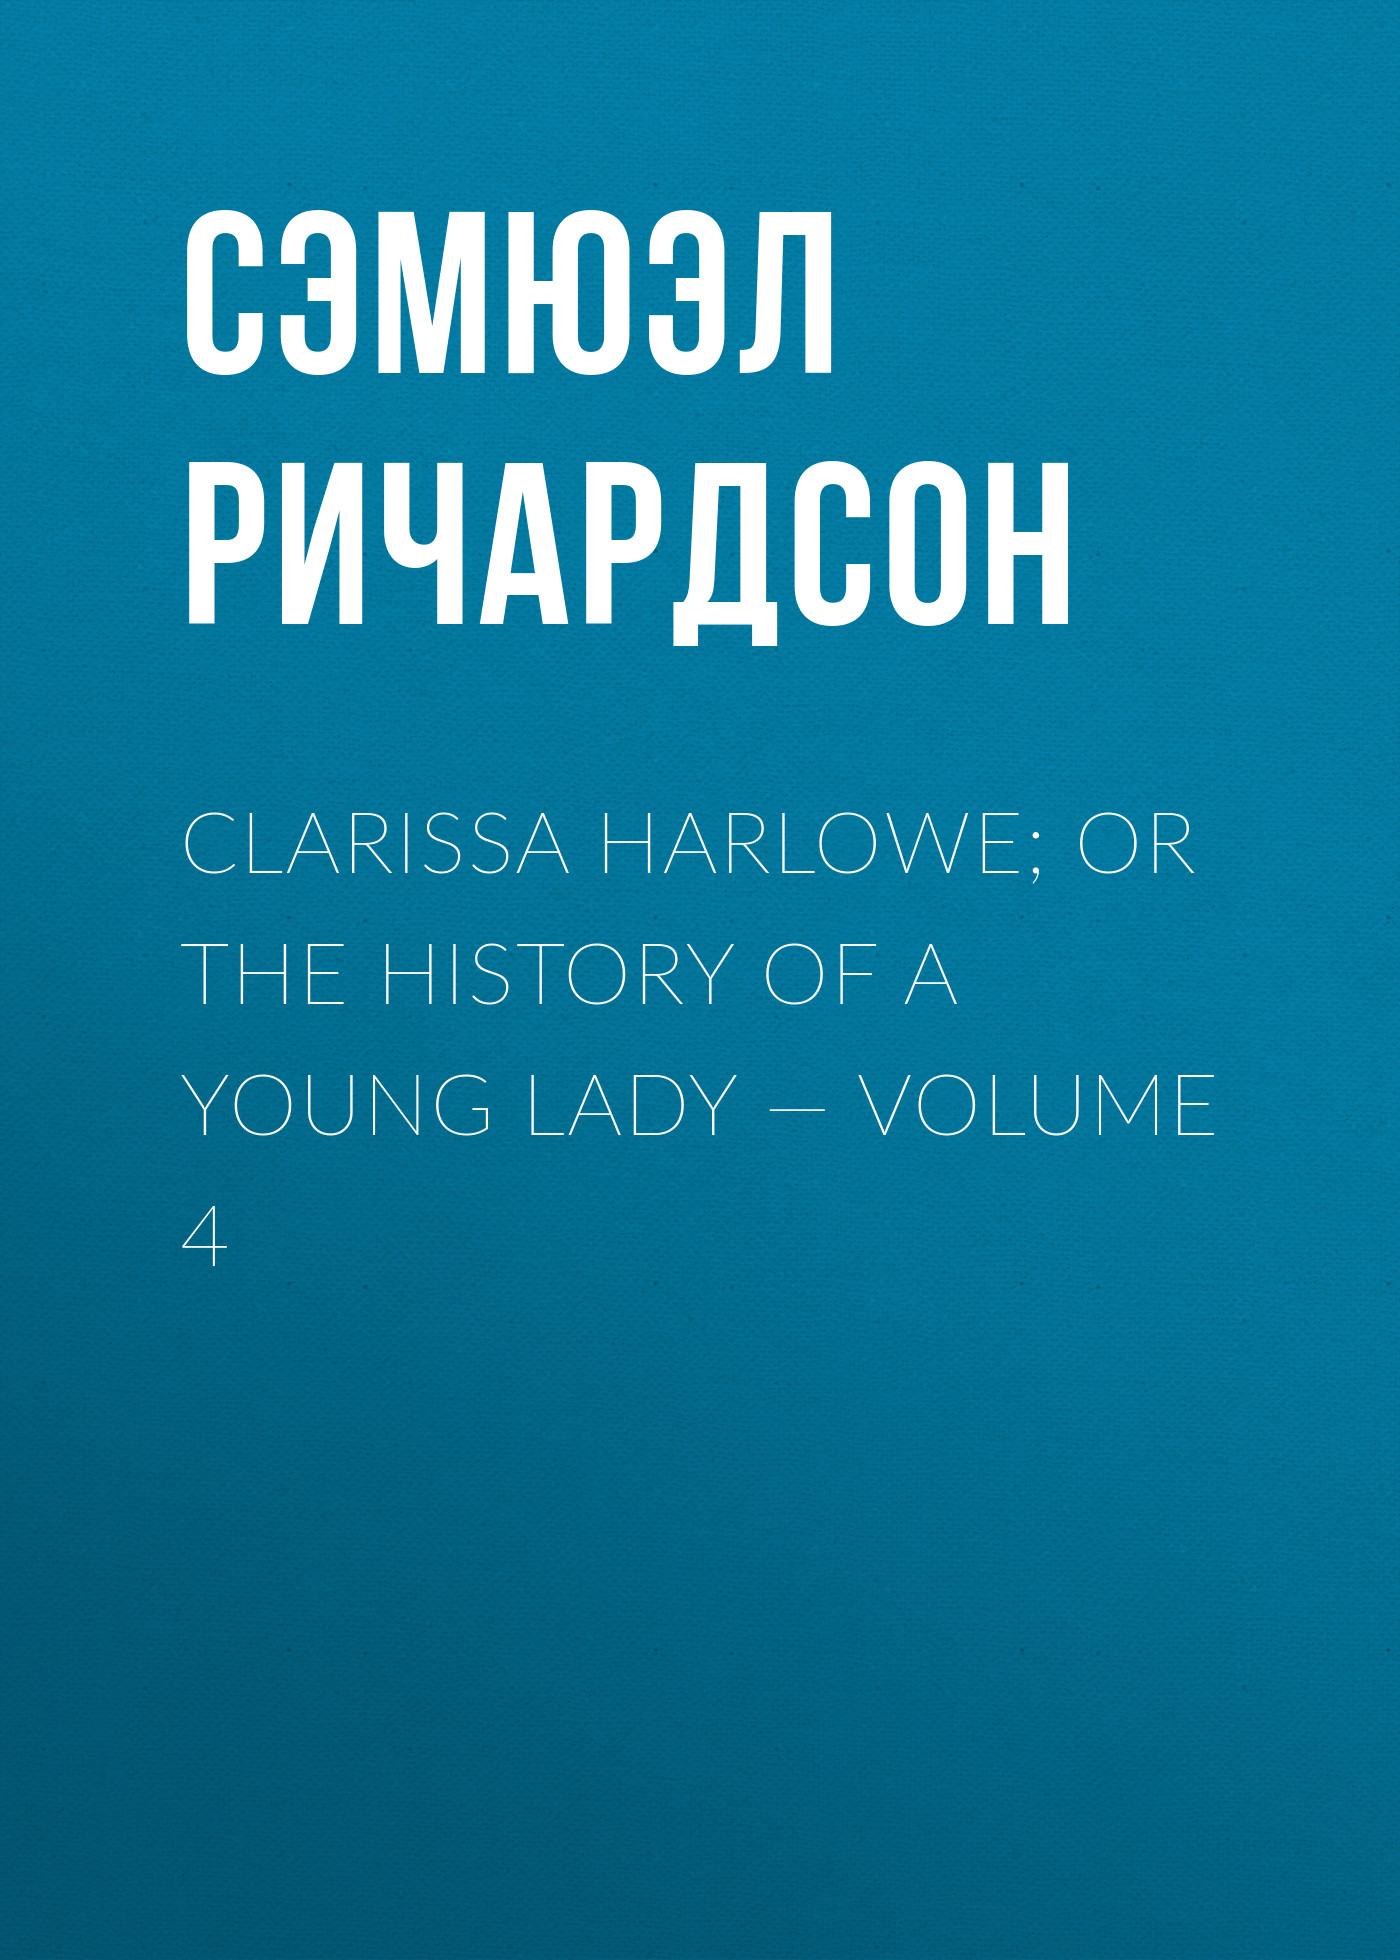 Clarissa Harlowe; or the history of a young lady— Volume 4